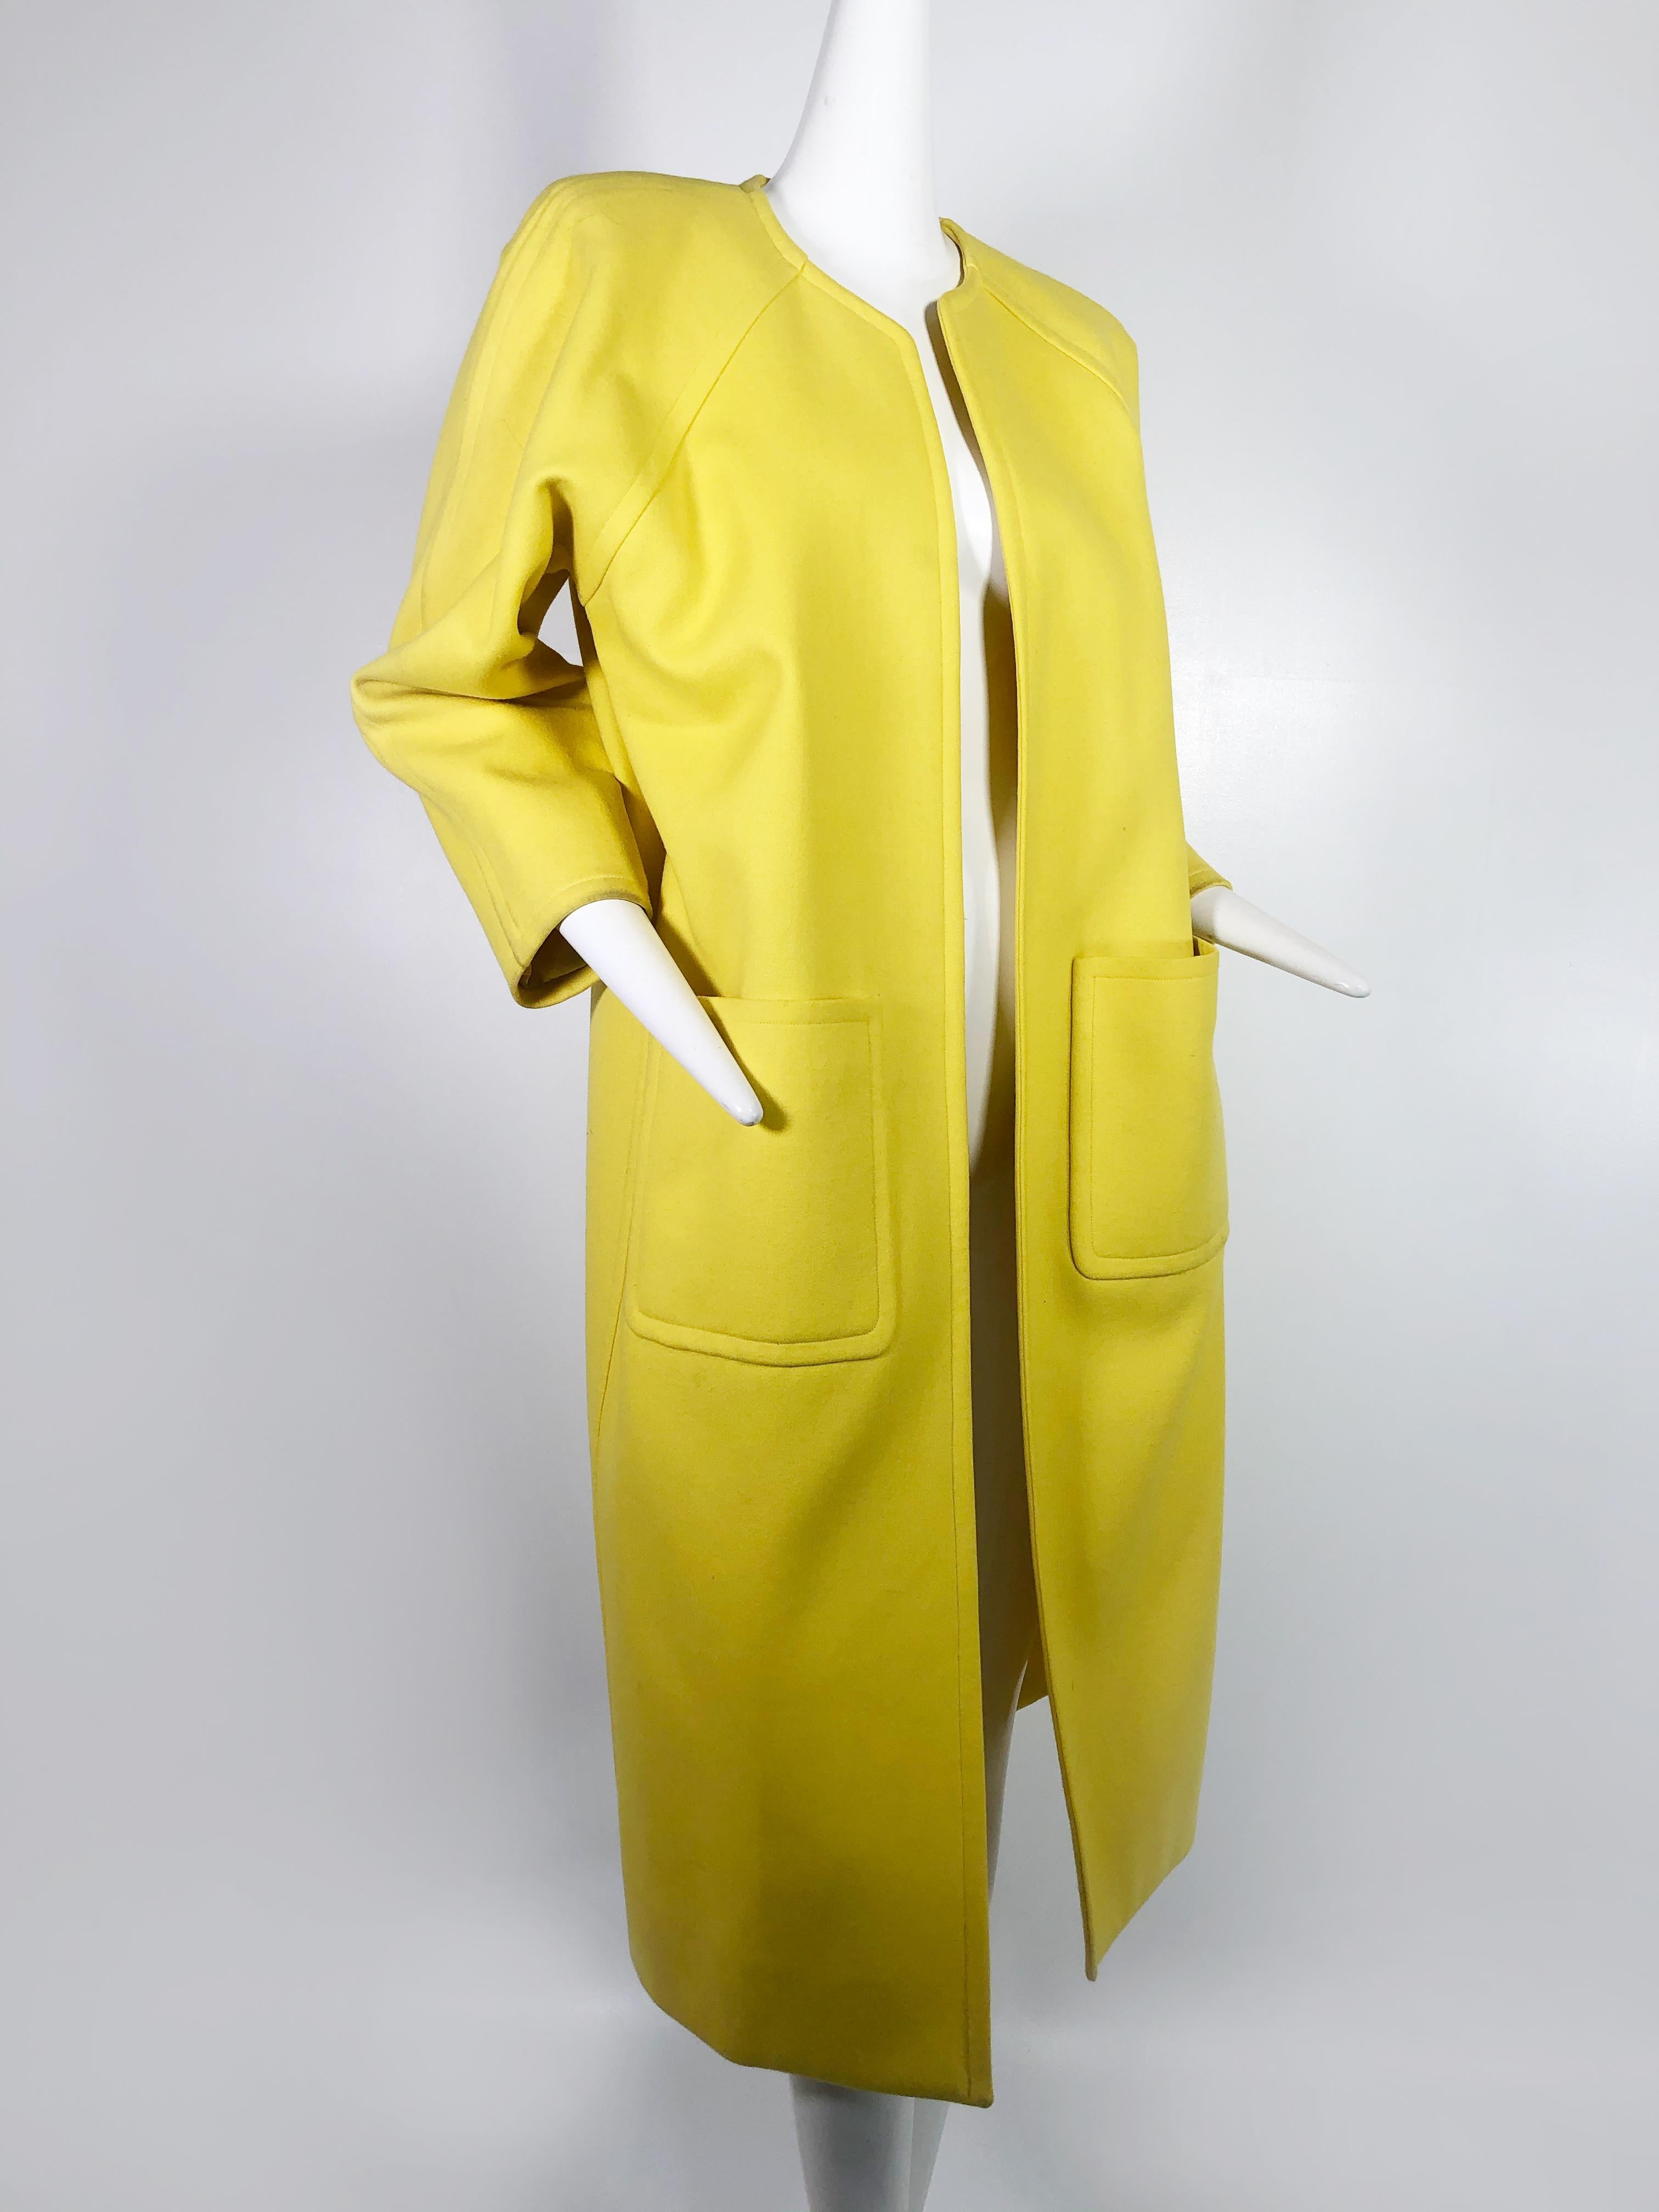 1980s Canary yellow wool overcoat with deep hip pockets and raglan sleeves with shoulder pads. Welted seams throughout. No closures. 